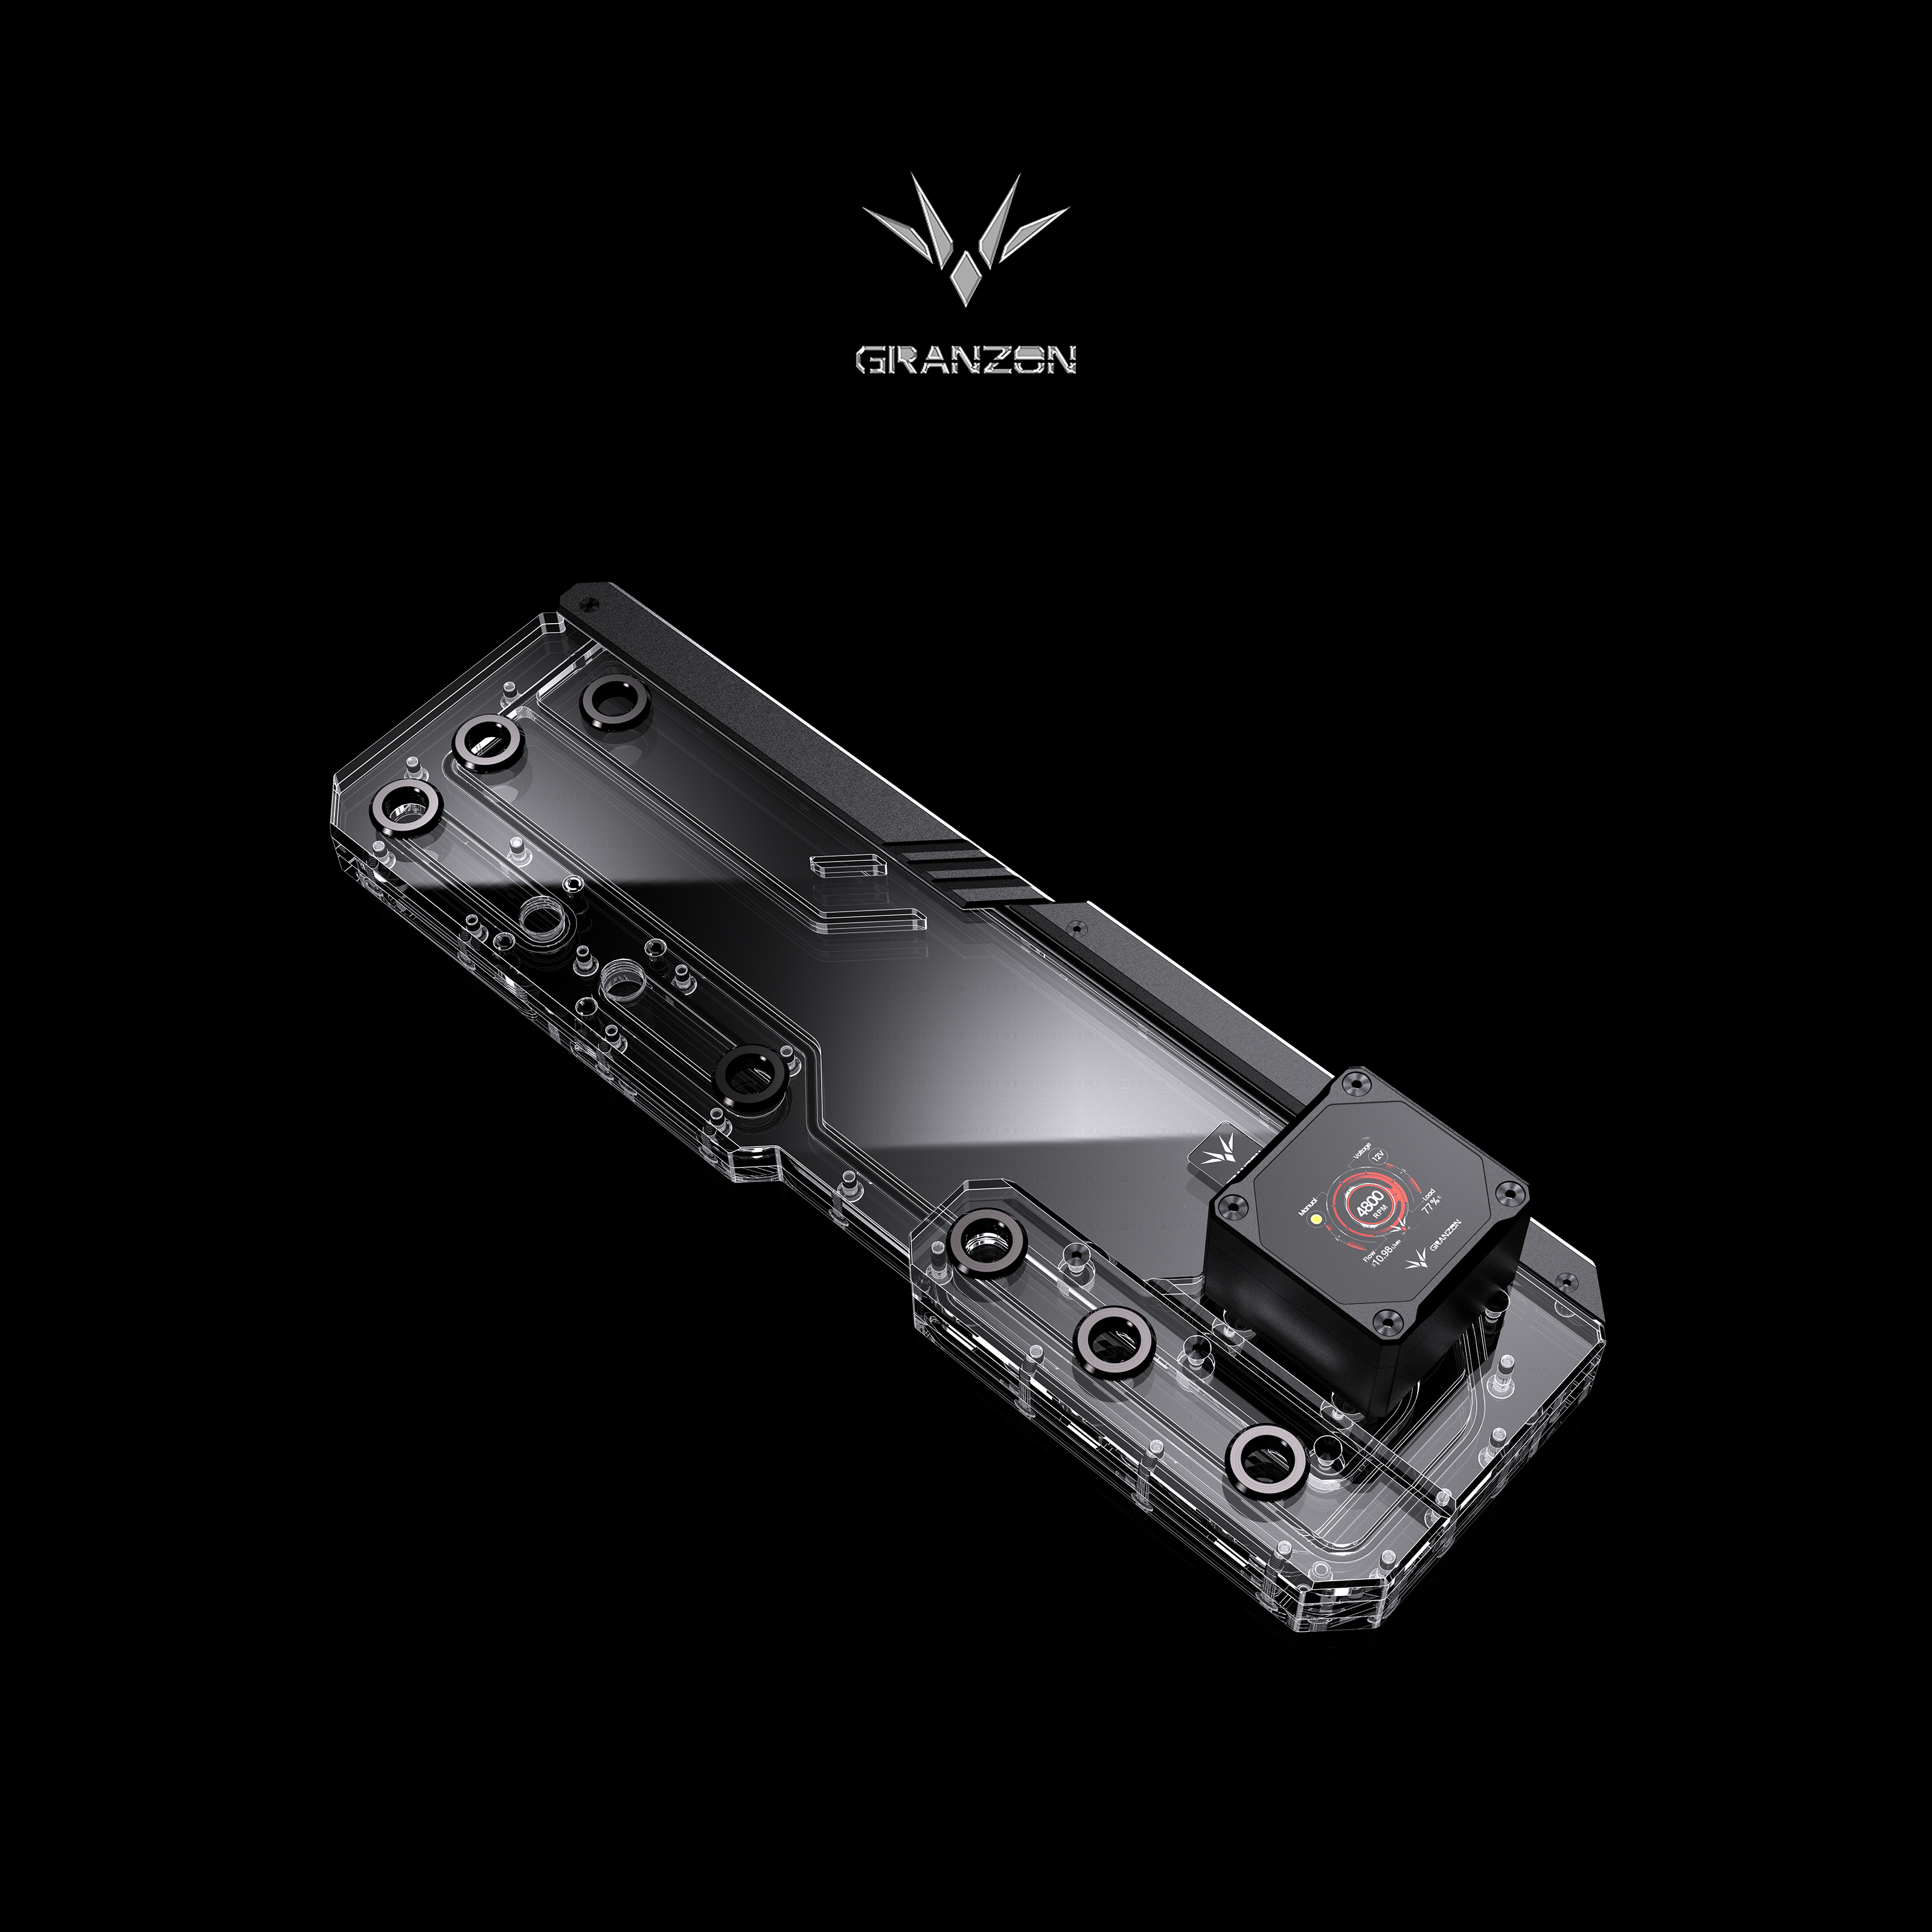 Granzon Advanced Distro Plate For Asus ROG Hyperion GR701 Case, Armor Type  Acrylic Waterway Board Combo DDC Pump, 5V A-RGB, GC-AS-GR701 at formulamod  sale